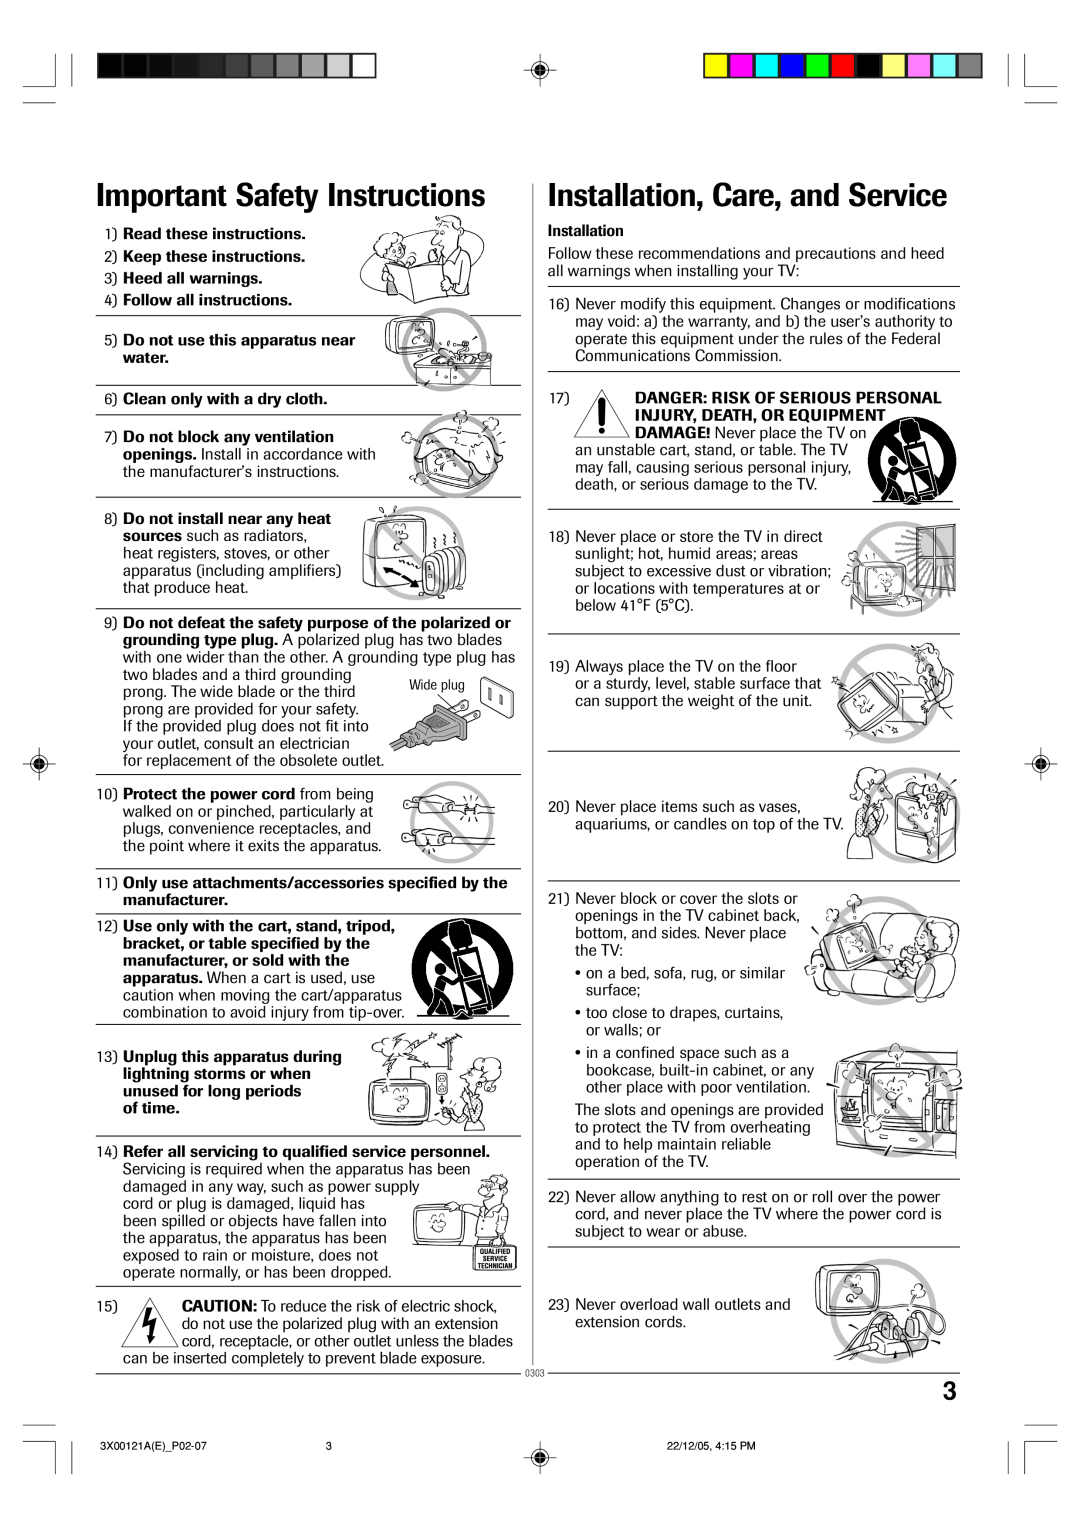 Toshiba 13A26 manual Important Safety Instructions, Installation, Care, and Service 